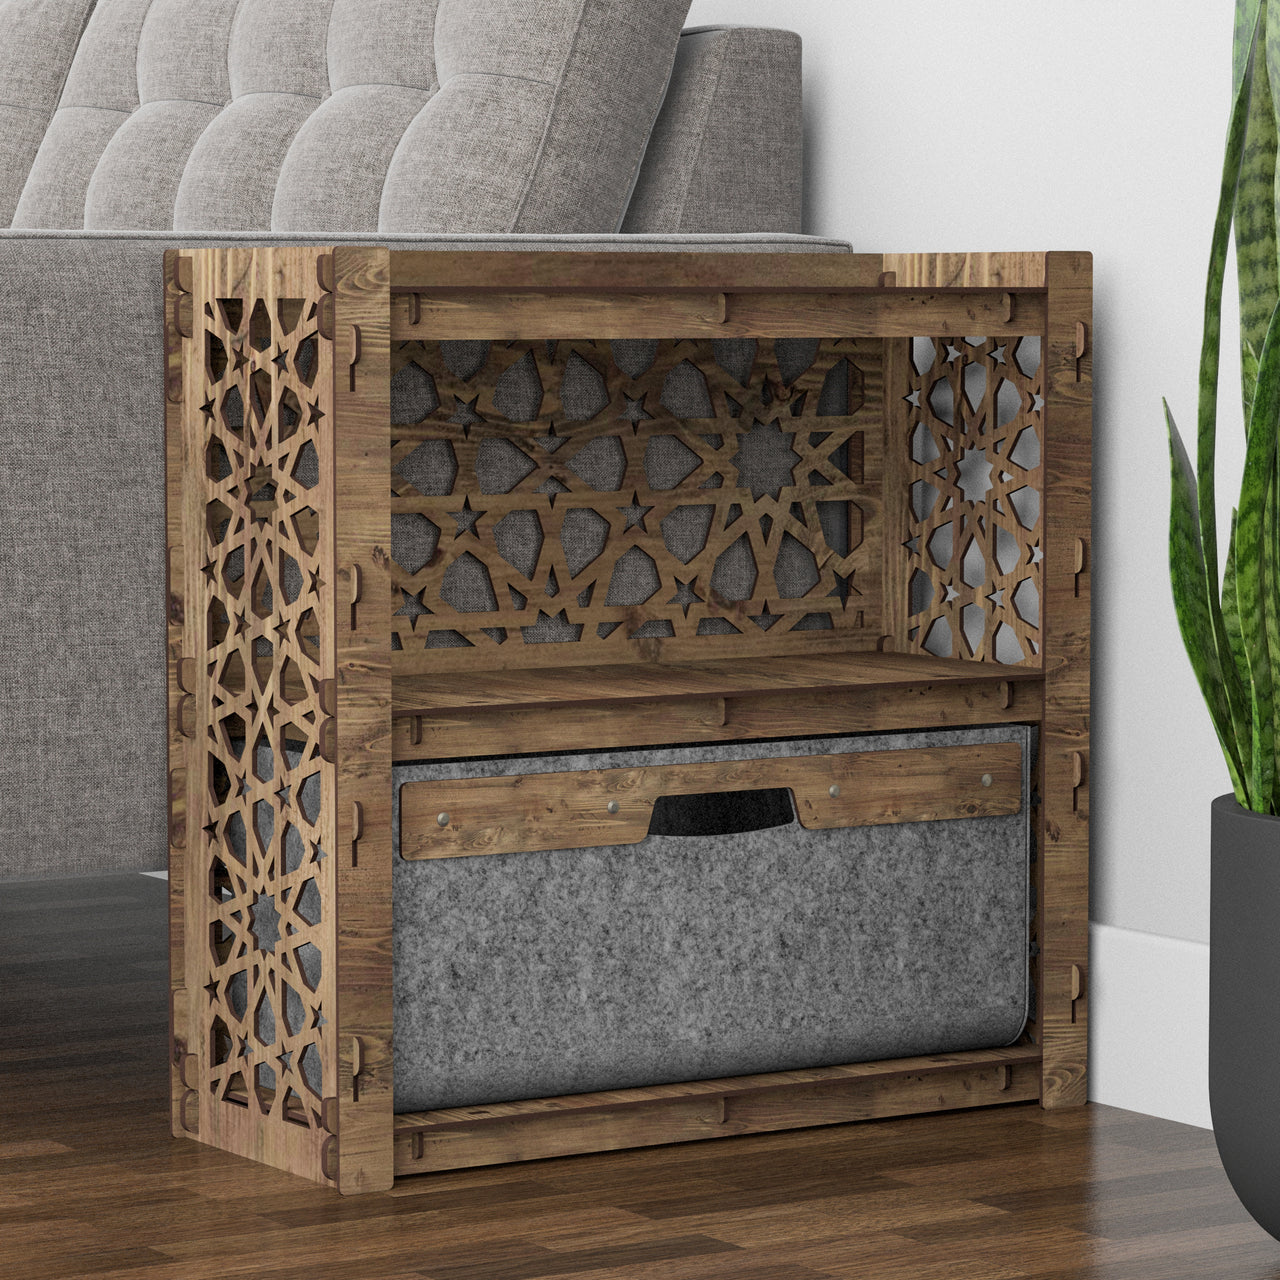 Arabic Side Table, End Table 1 Drawer [1 LARGE GRAY BIN]